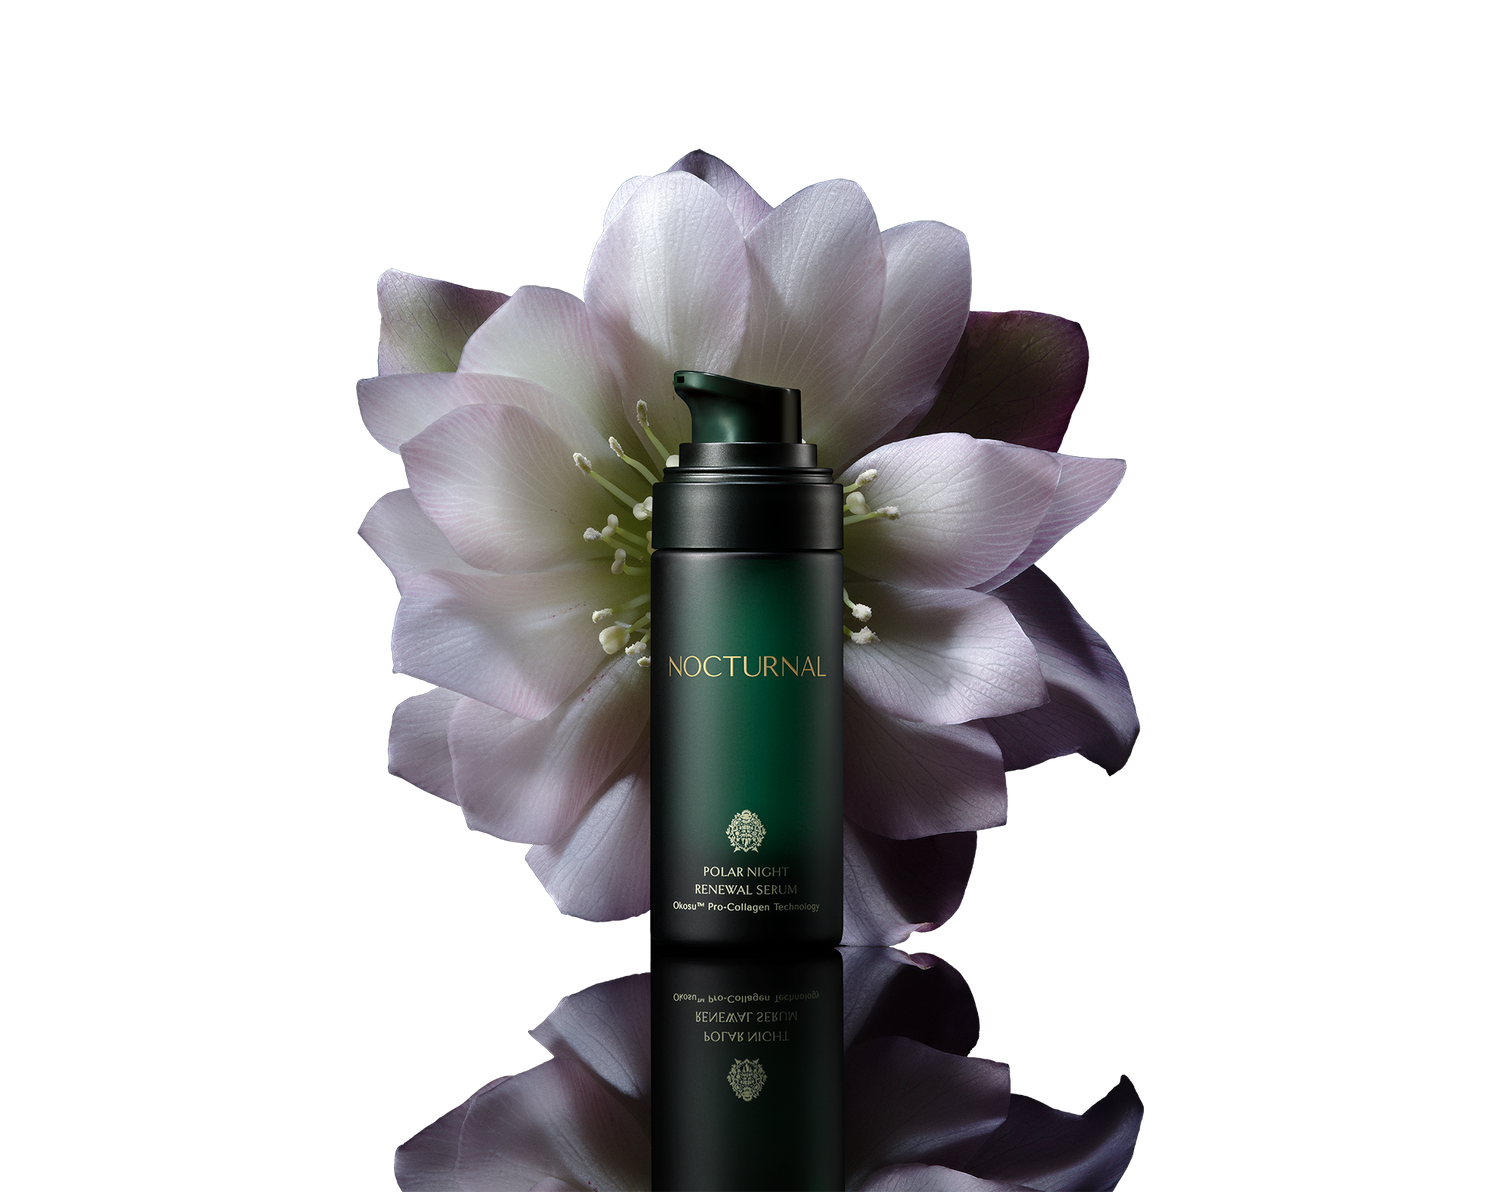 This is full size the Polar Night Anti-aging renewal serum. It is a dark green glass bottle with the cap off. The bottle is sitting in front of a beautiful night blooming flower. 